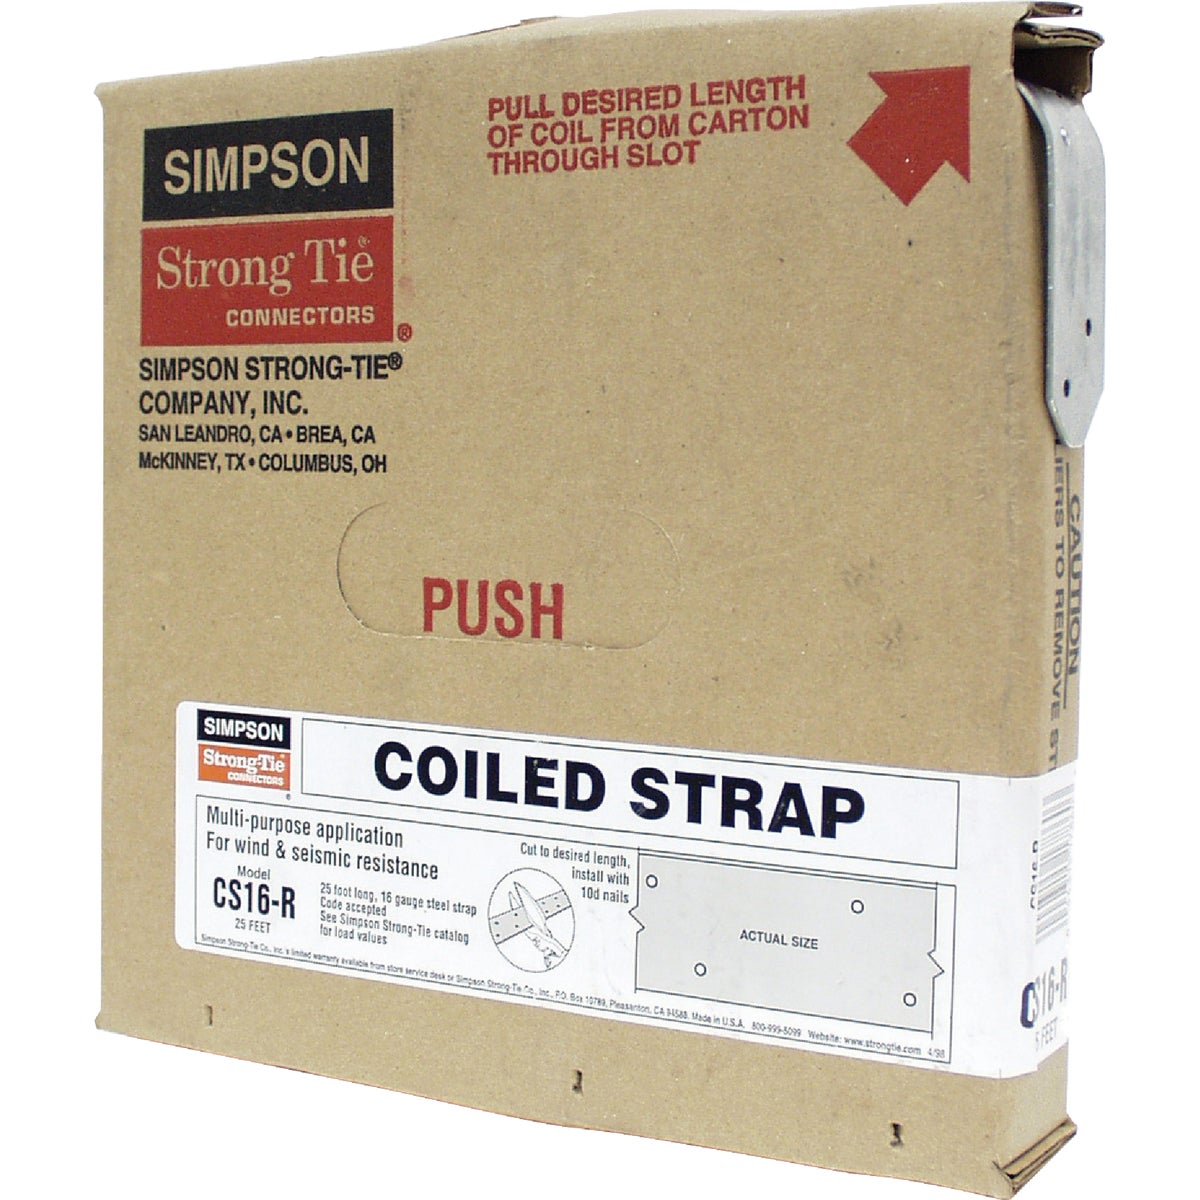 Simpson Strong-Tie 1-1/4 in. x 25 ft. Galvanized Steel 16 Gauge Coiled Strapping